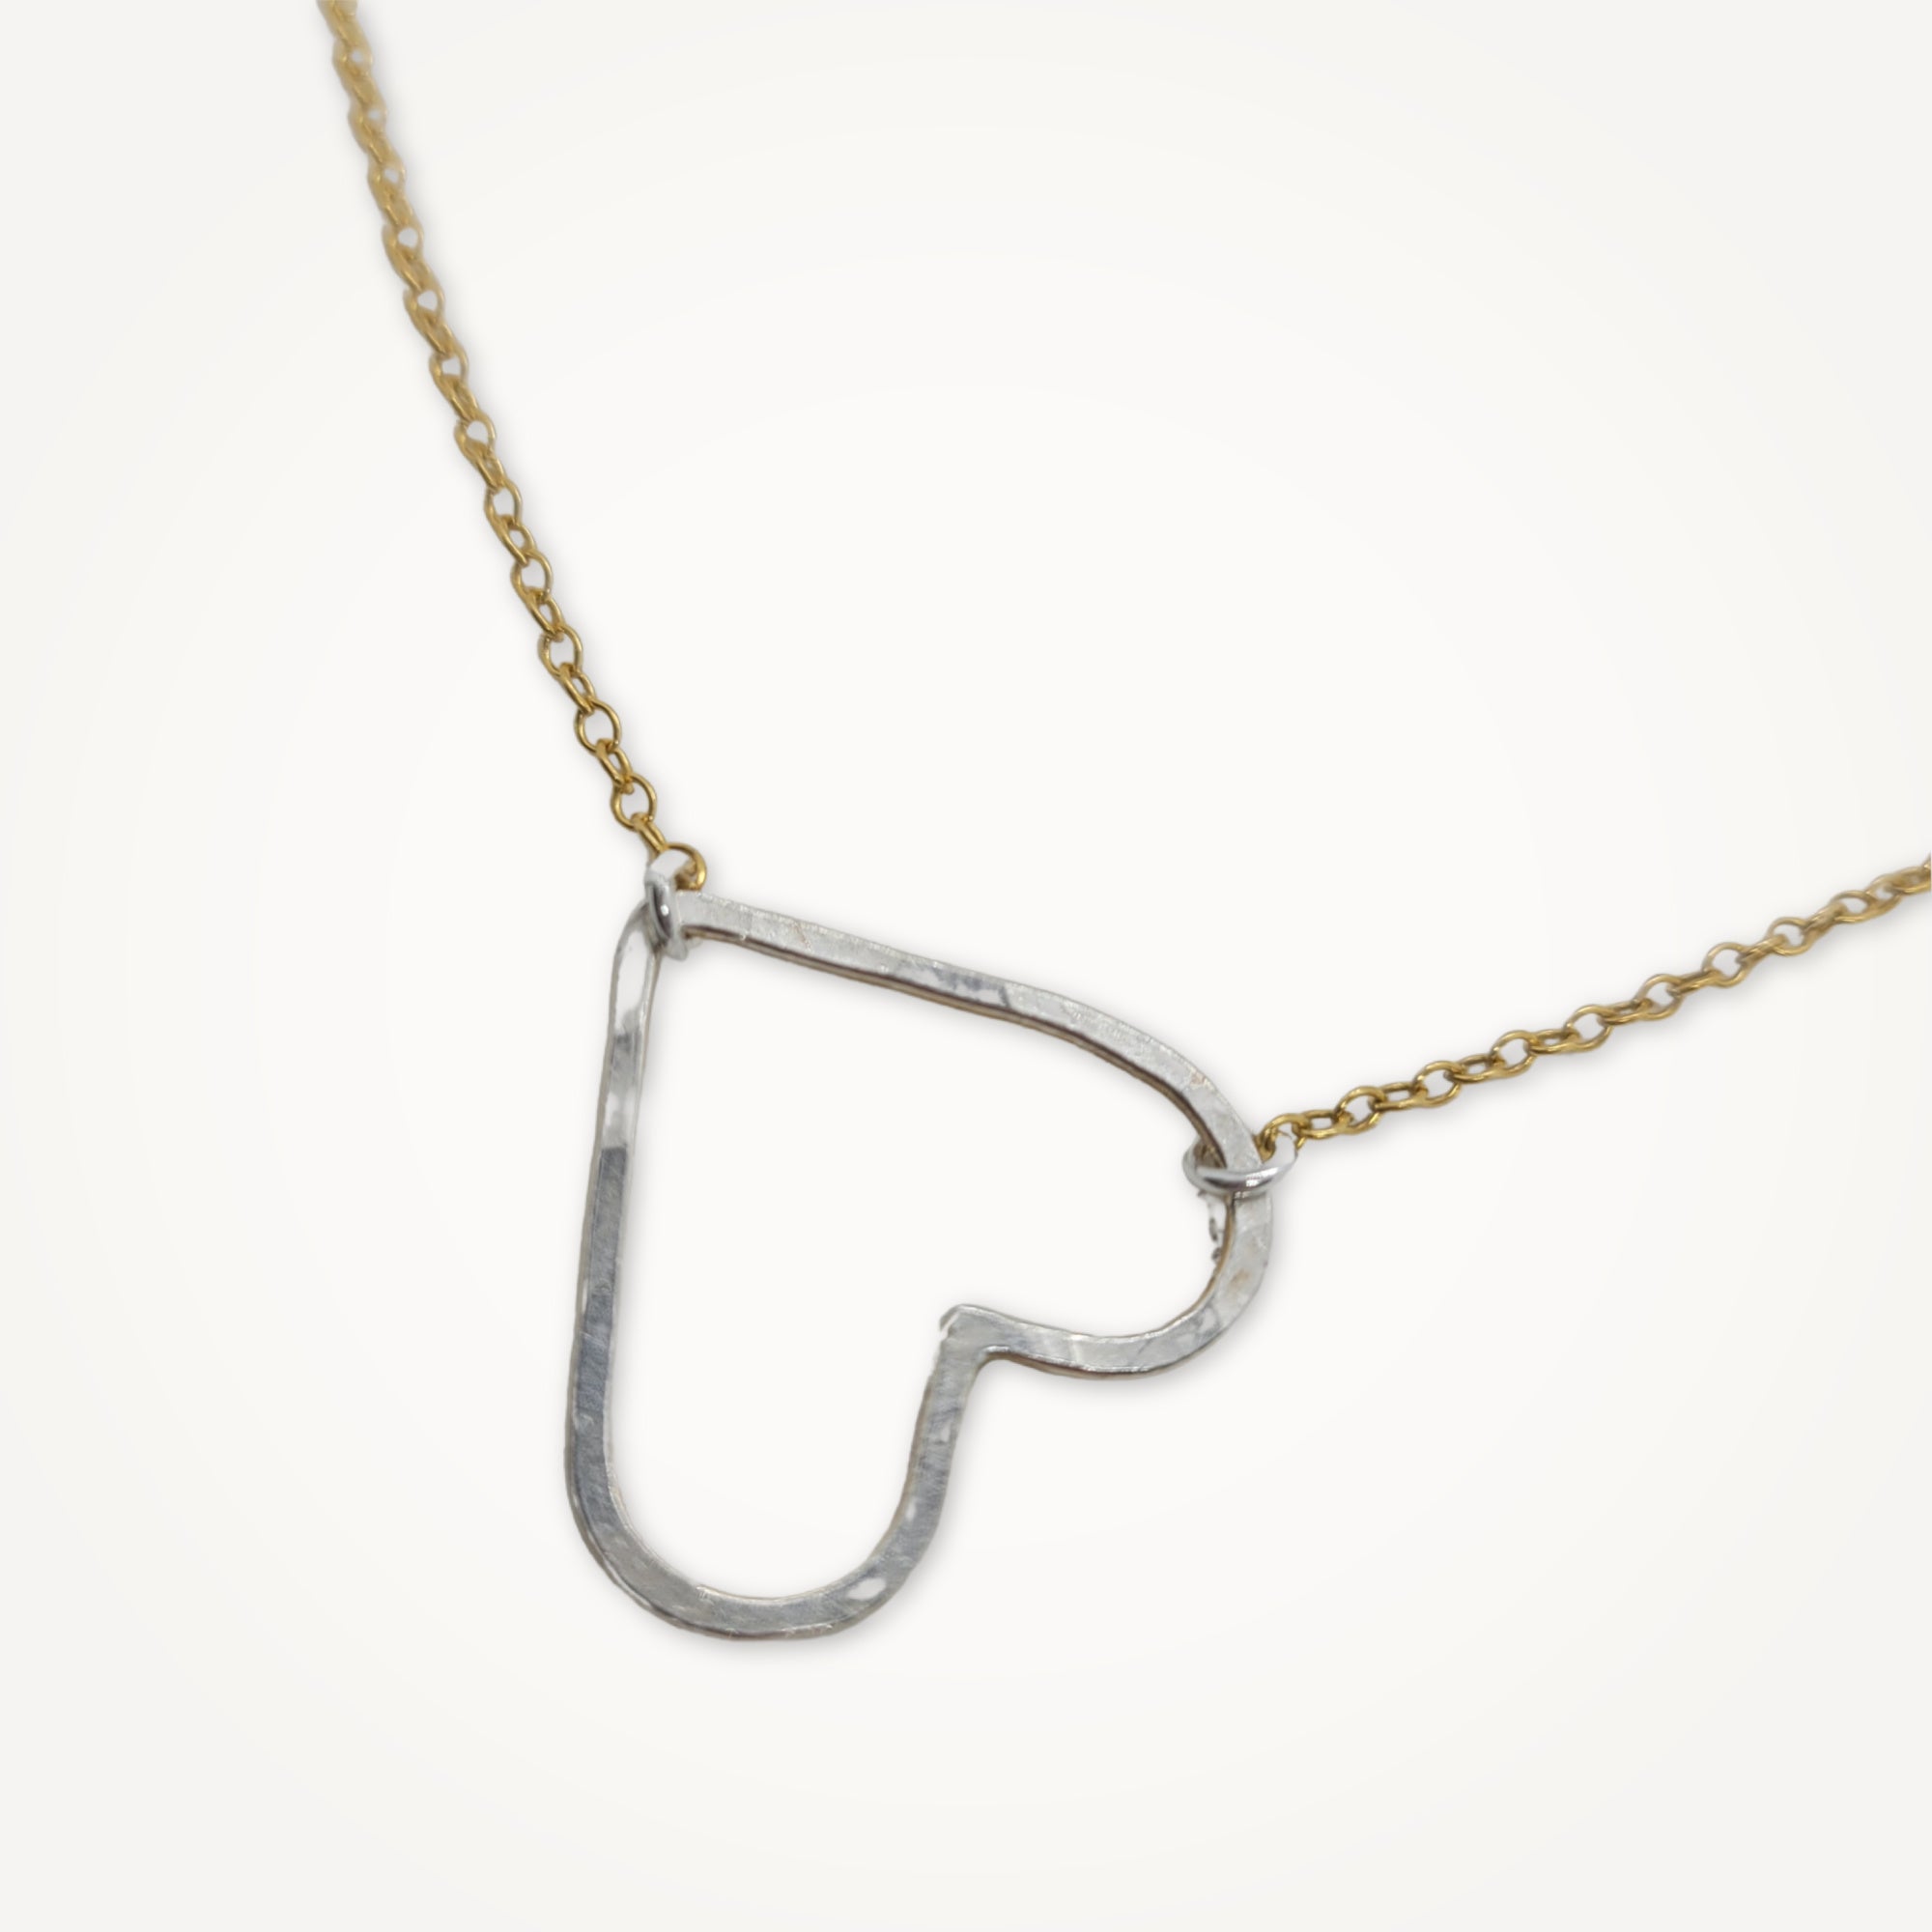 10 Best Personalized Necklaces 2022 | Rank & Style